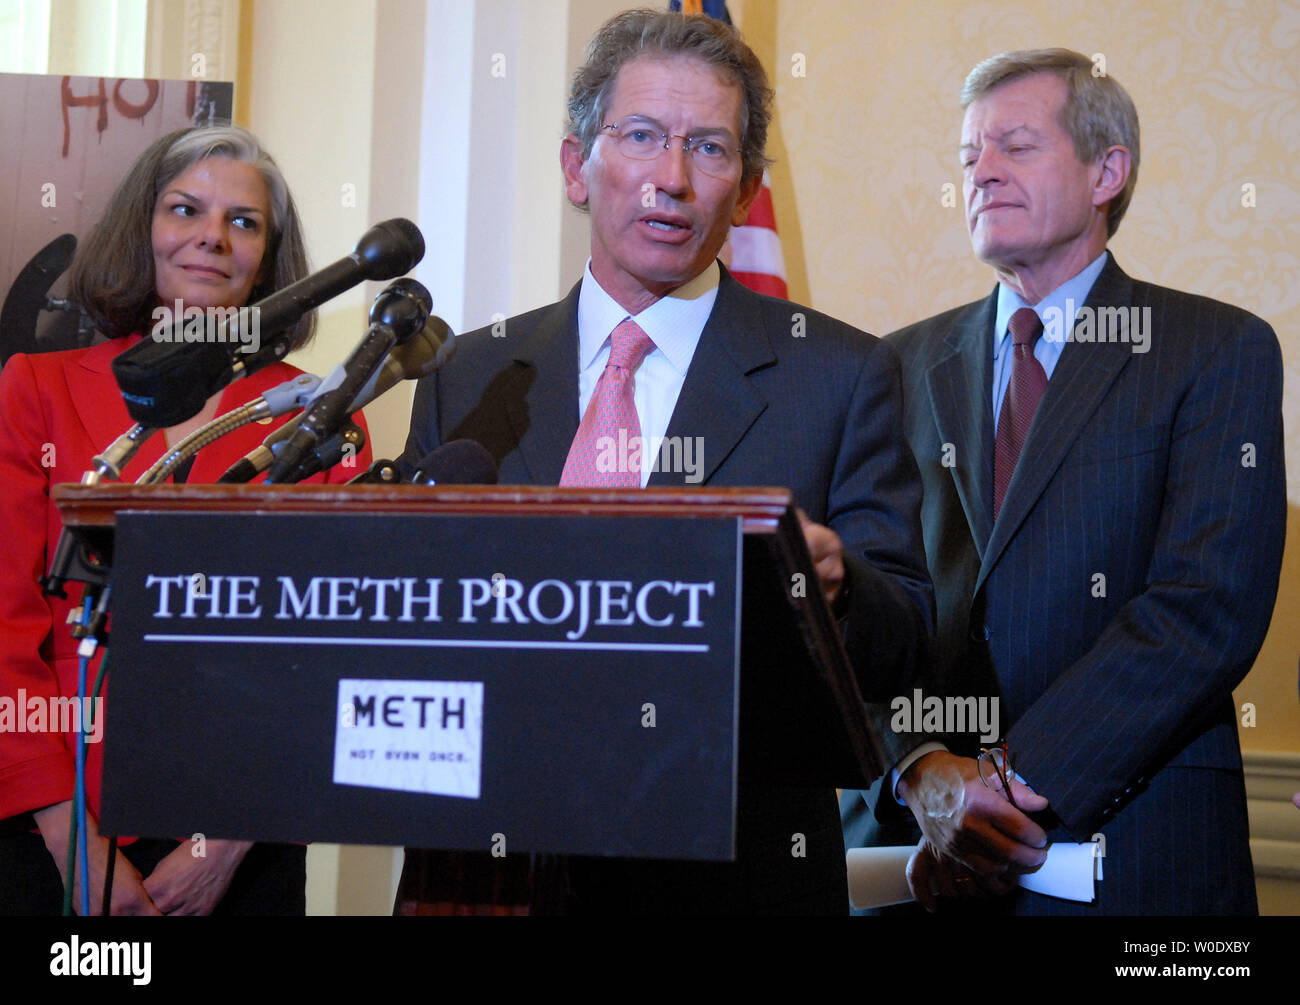 Thomas Siebel (C), Chairman and founder of The Meth Project, talks alongside Sen. Max Baucus (R-MT) (R) and CDC Director Julie Gerberding at a news conference to discuss the findings of the first national survey on methamphetamine use and attitudes in Washington on September 18, 2007. The Meth Project is a large-scale prevention program aimed at reducing first-time methamphetamine use through public outreach, public service messaging and community outreach. (UPI Photo/Kevin Dietsch) Stock Photo